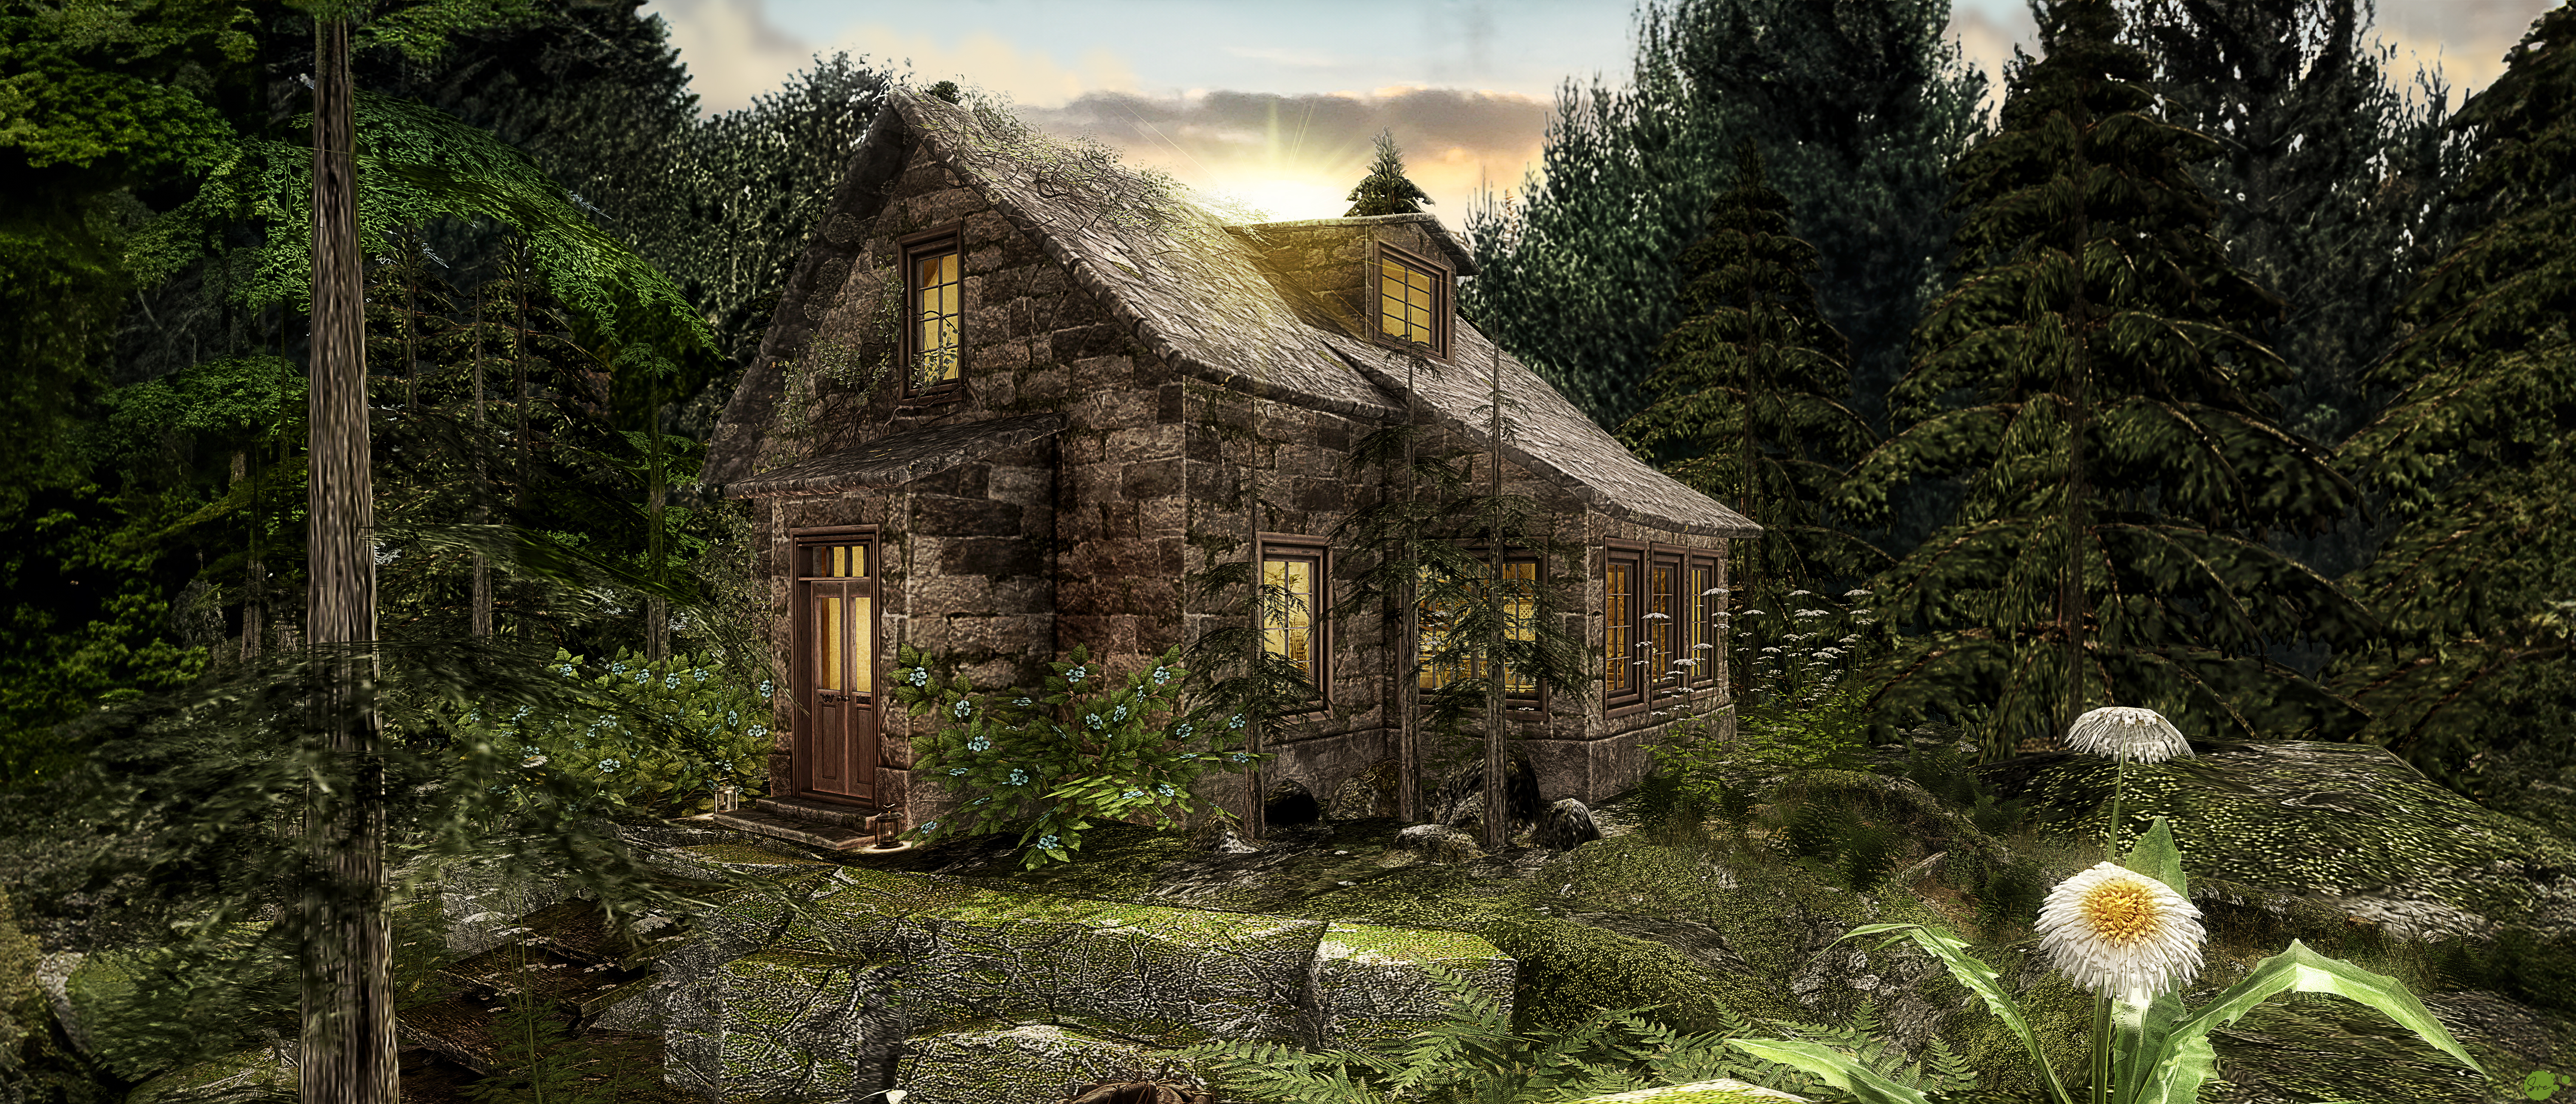 The Dense Forest – A Cabin In The Woods